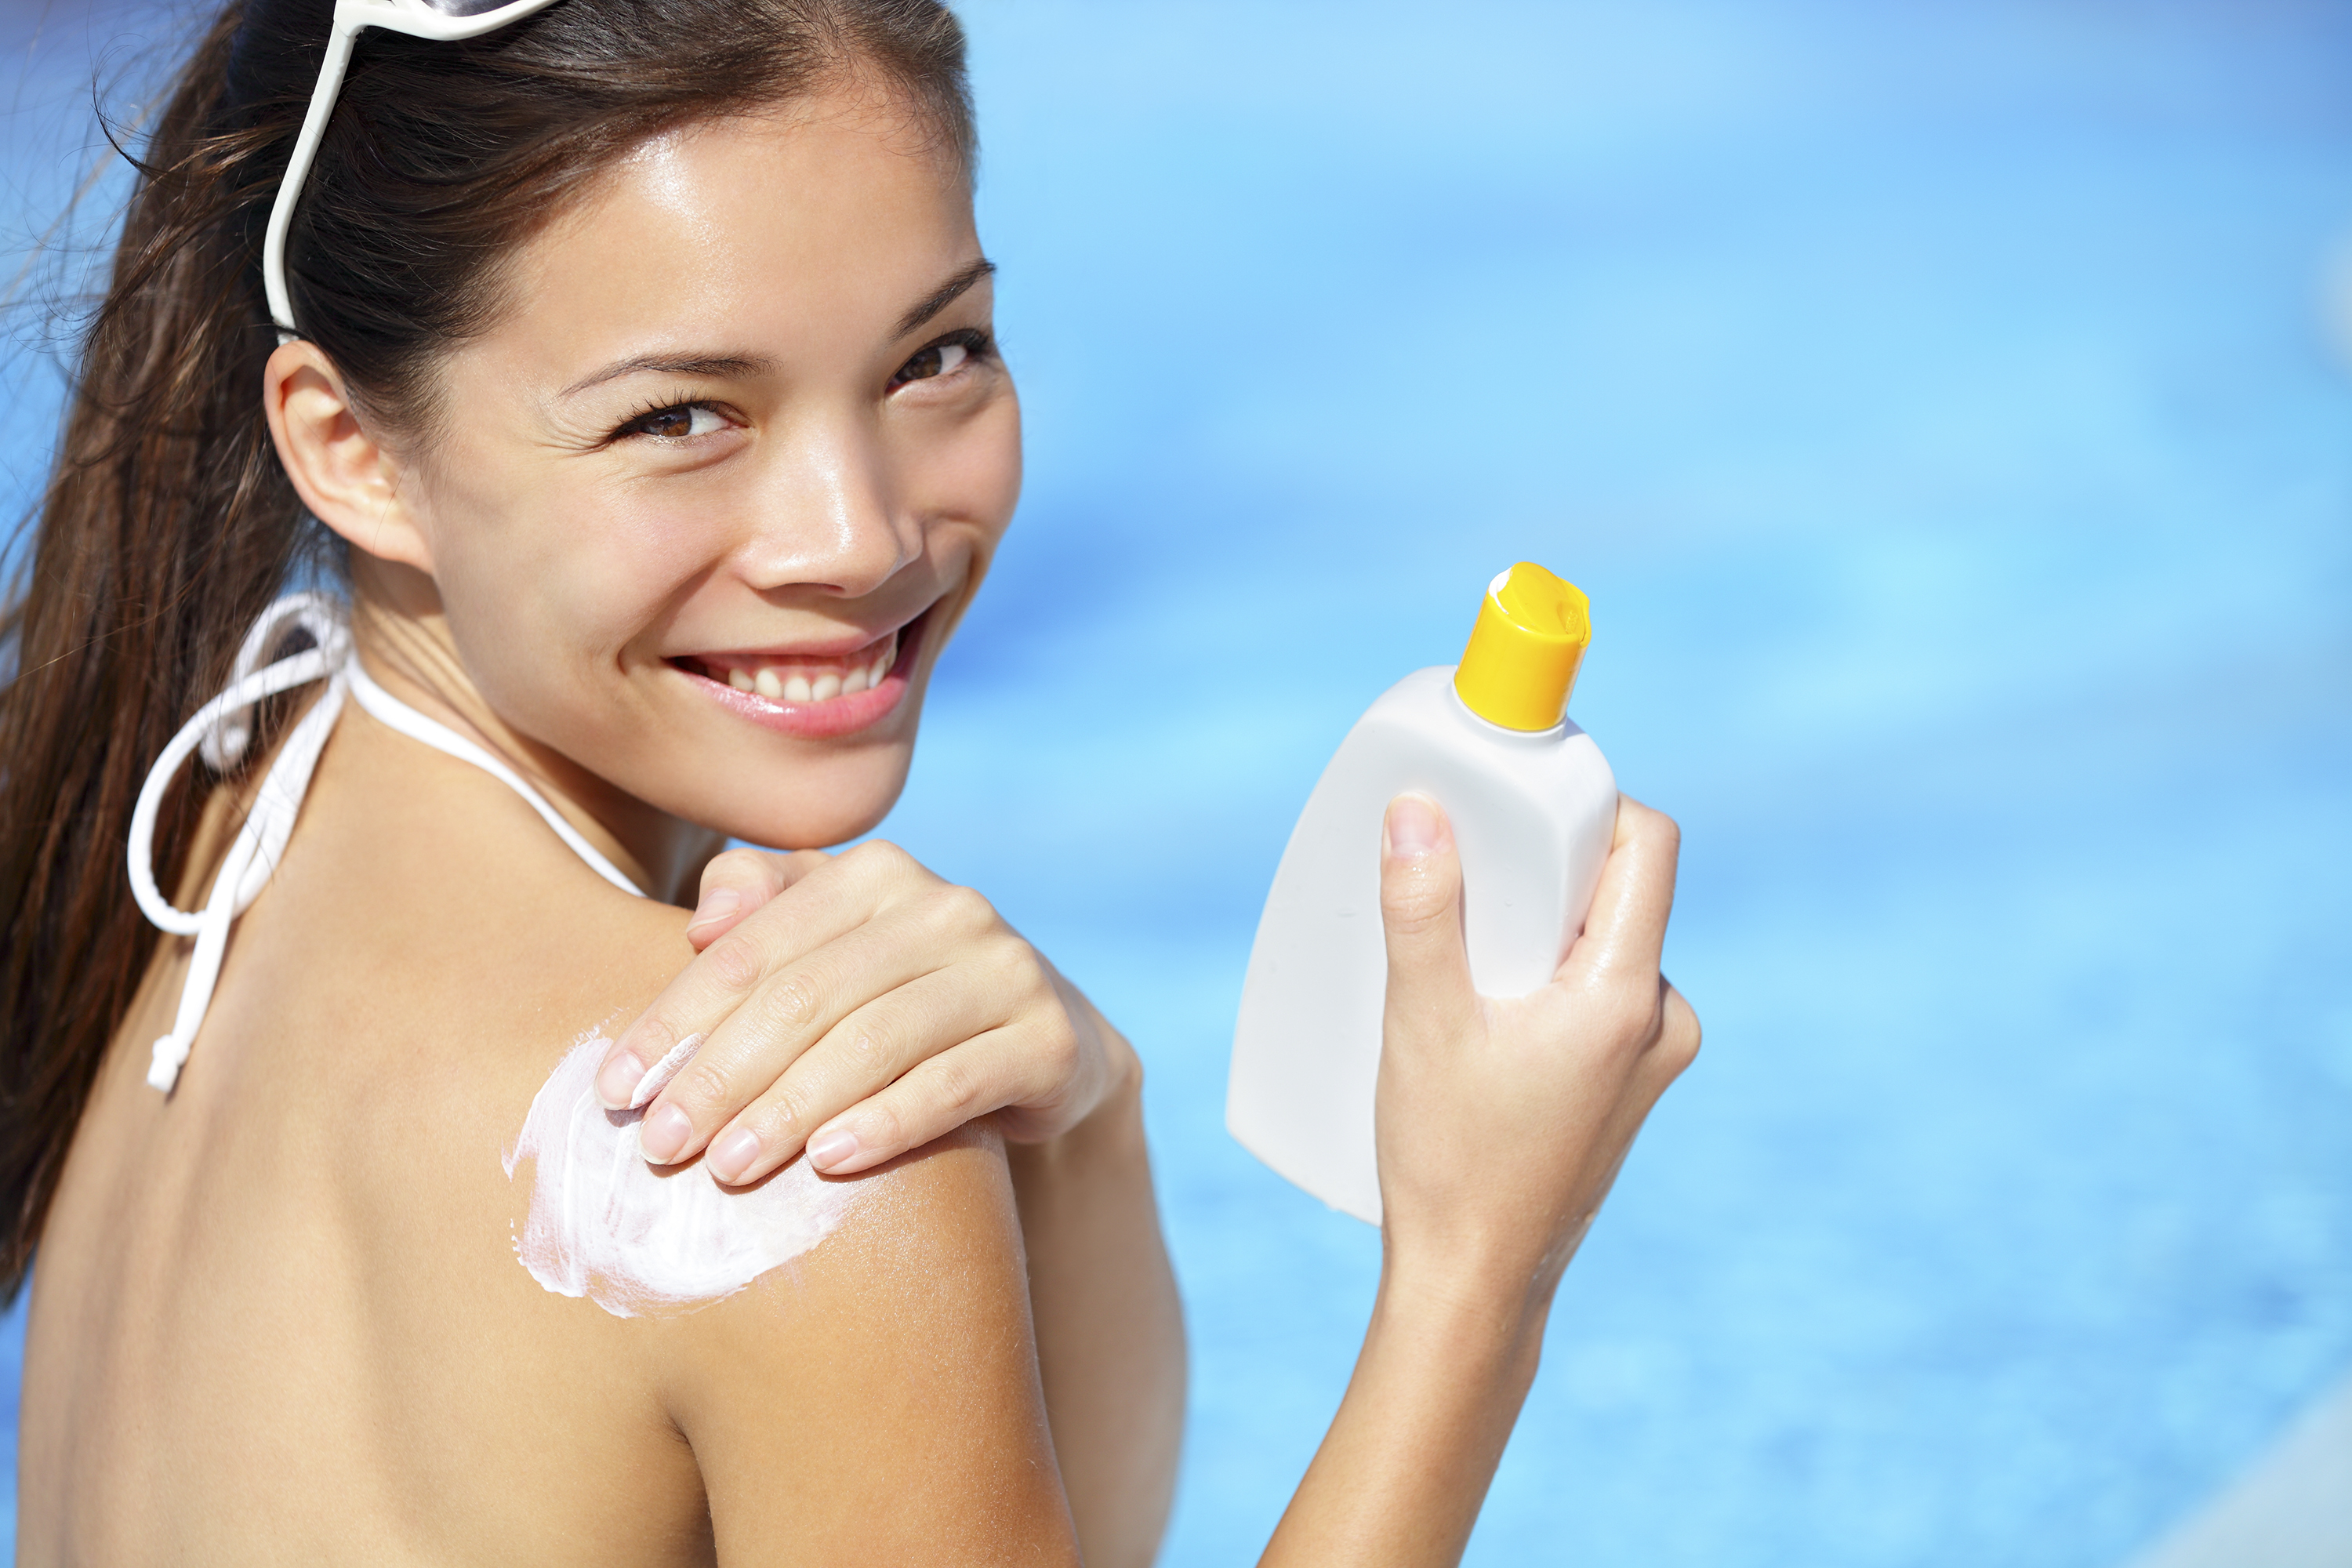 Doctors recommend  a broad-spectrum, water-resistant sunscreen with an SPF of 30 or higher be applied at least 15 minutes before sun exposure then every  2 hours. (Photo: Agencia de Imprensa)